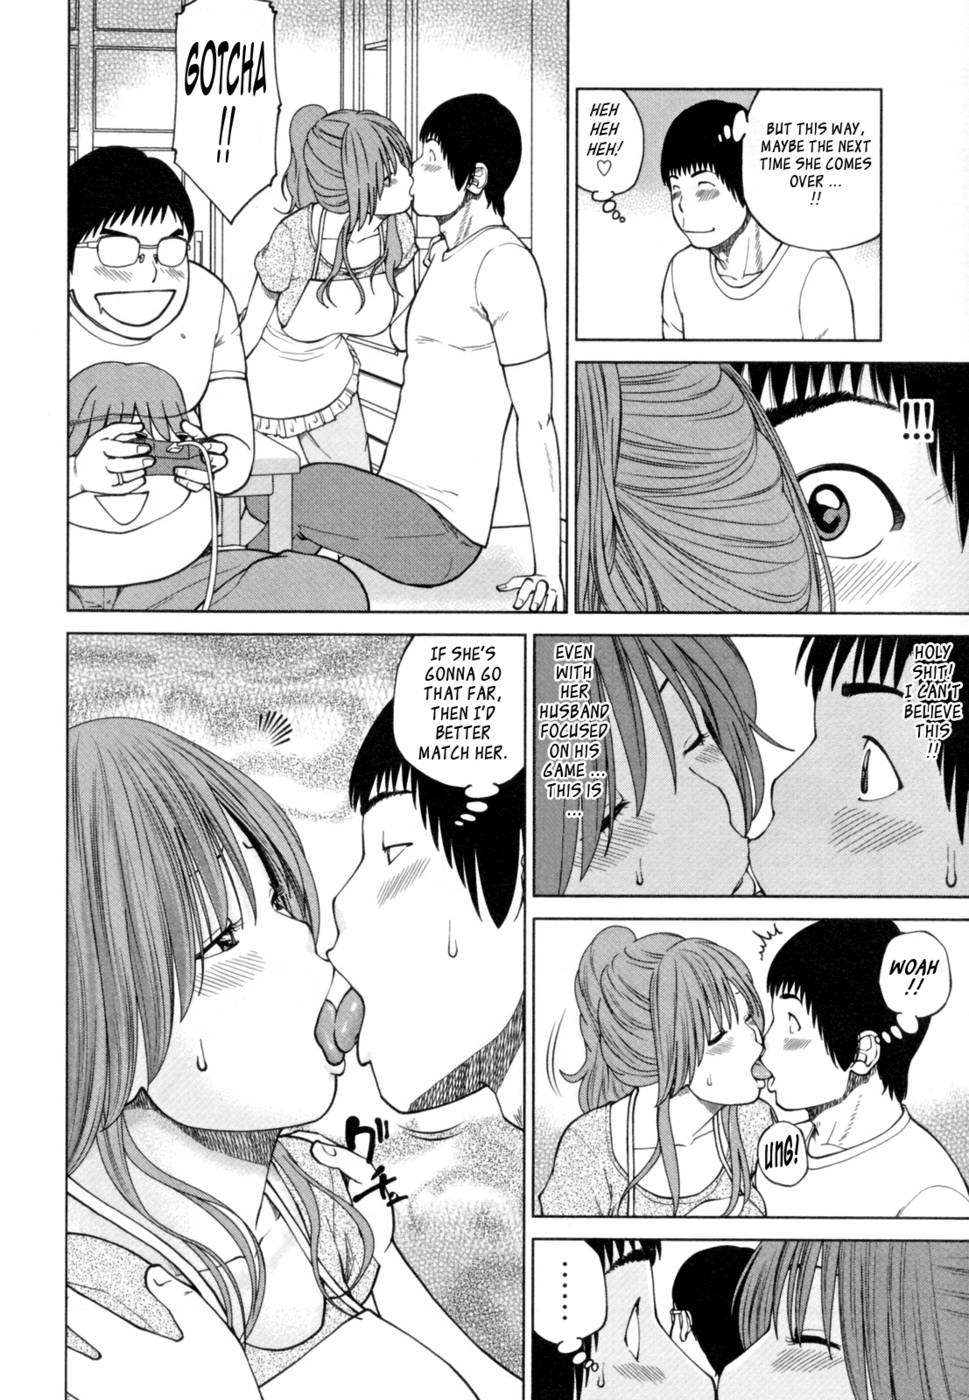 Hentai Manga Comic-32 Year Old Unsatisfied Wife-Chapter 10-The Wife Next Door-6